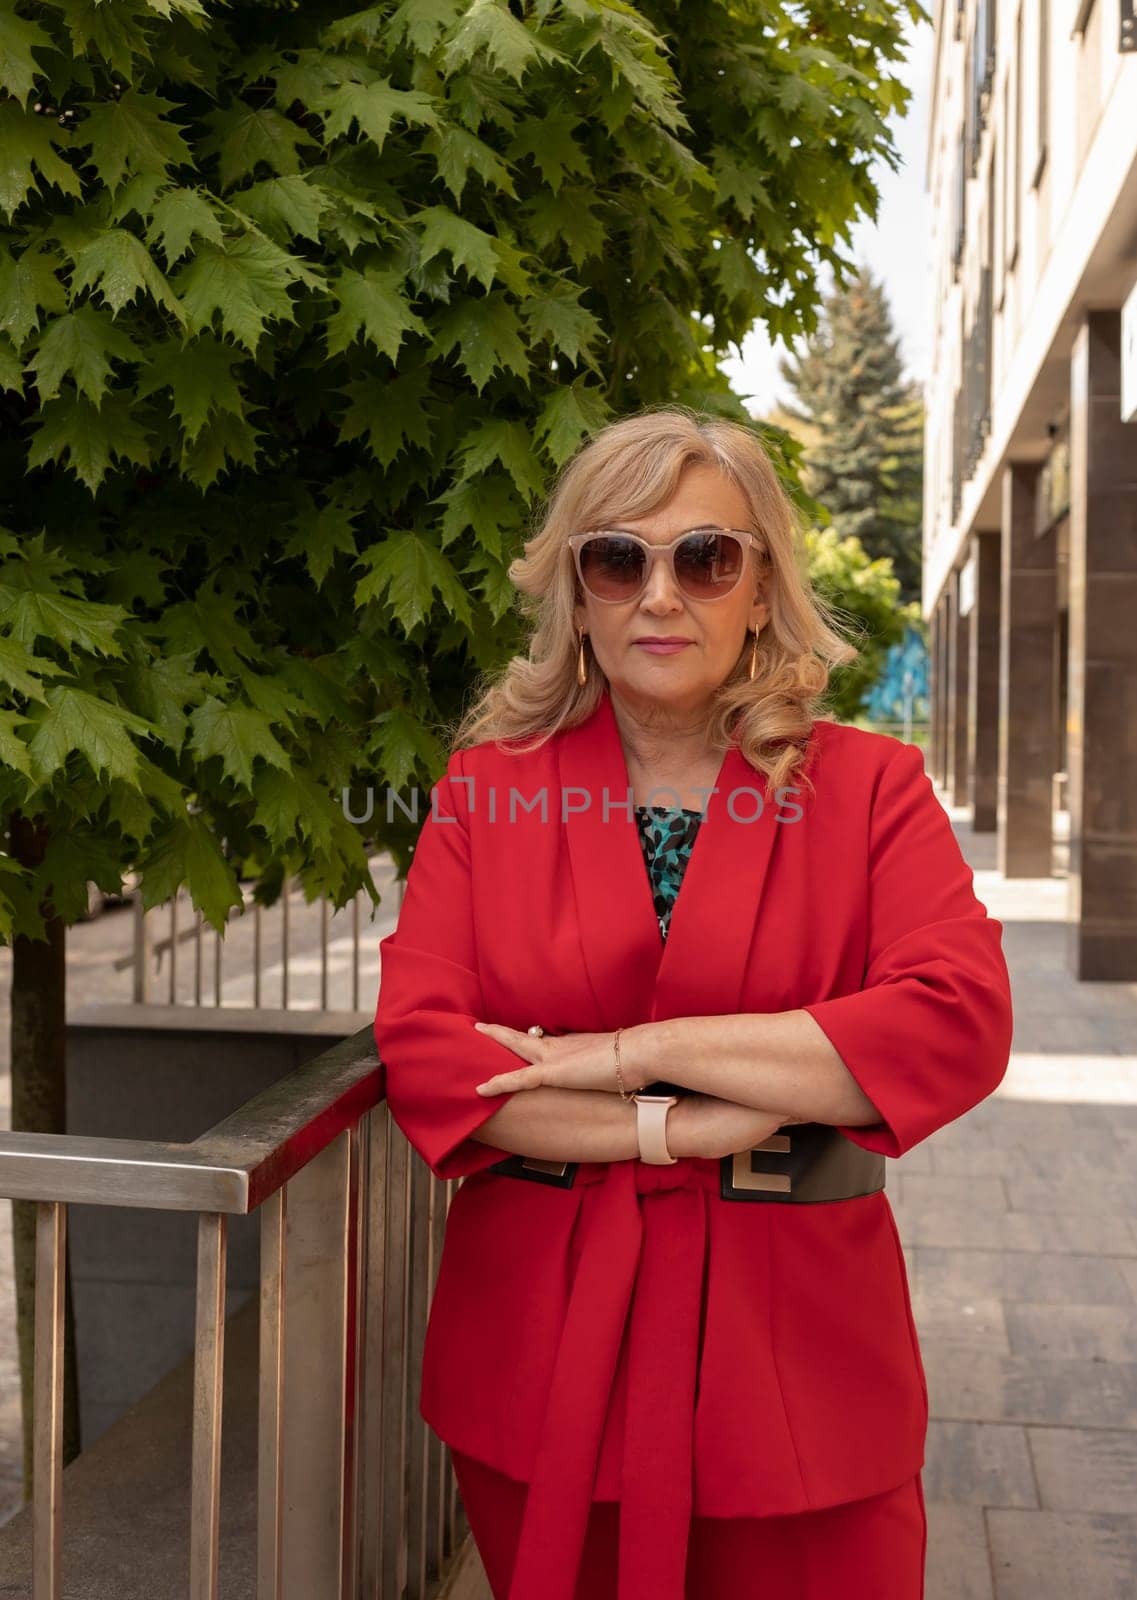 Portrait Posing Business Lady, Mature Sexagenarian Woman Outdoor in Summer Time, City, Stylish Confident Senior Female in her 60s Wears Sunglasses. Boss or Manager. Vertical Plane by netatsi